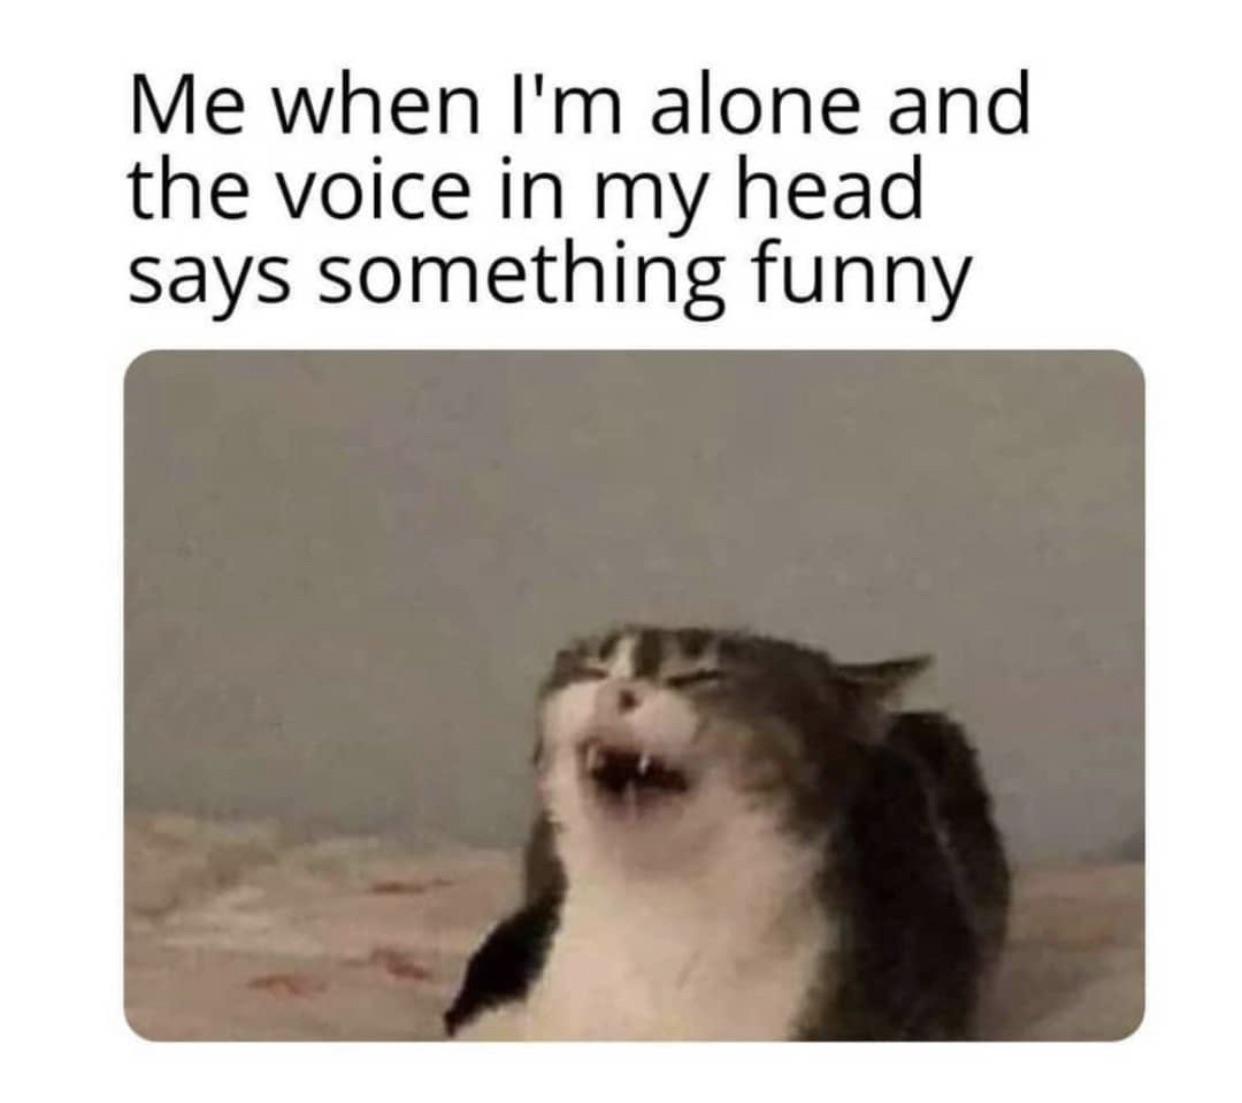 me when i m alone and the voice - Me when I'm alone and the voice in my head says something funny